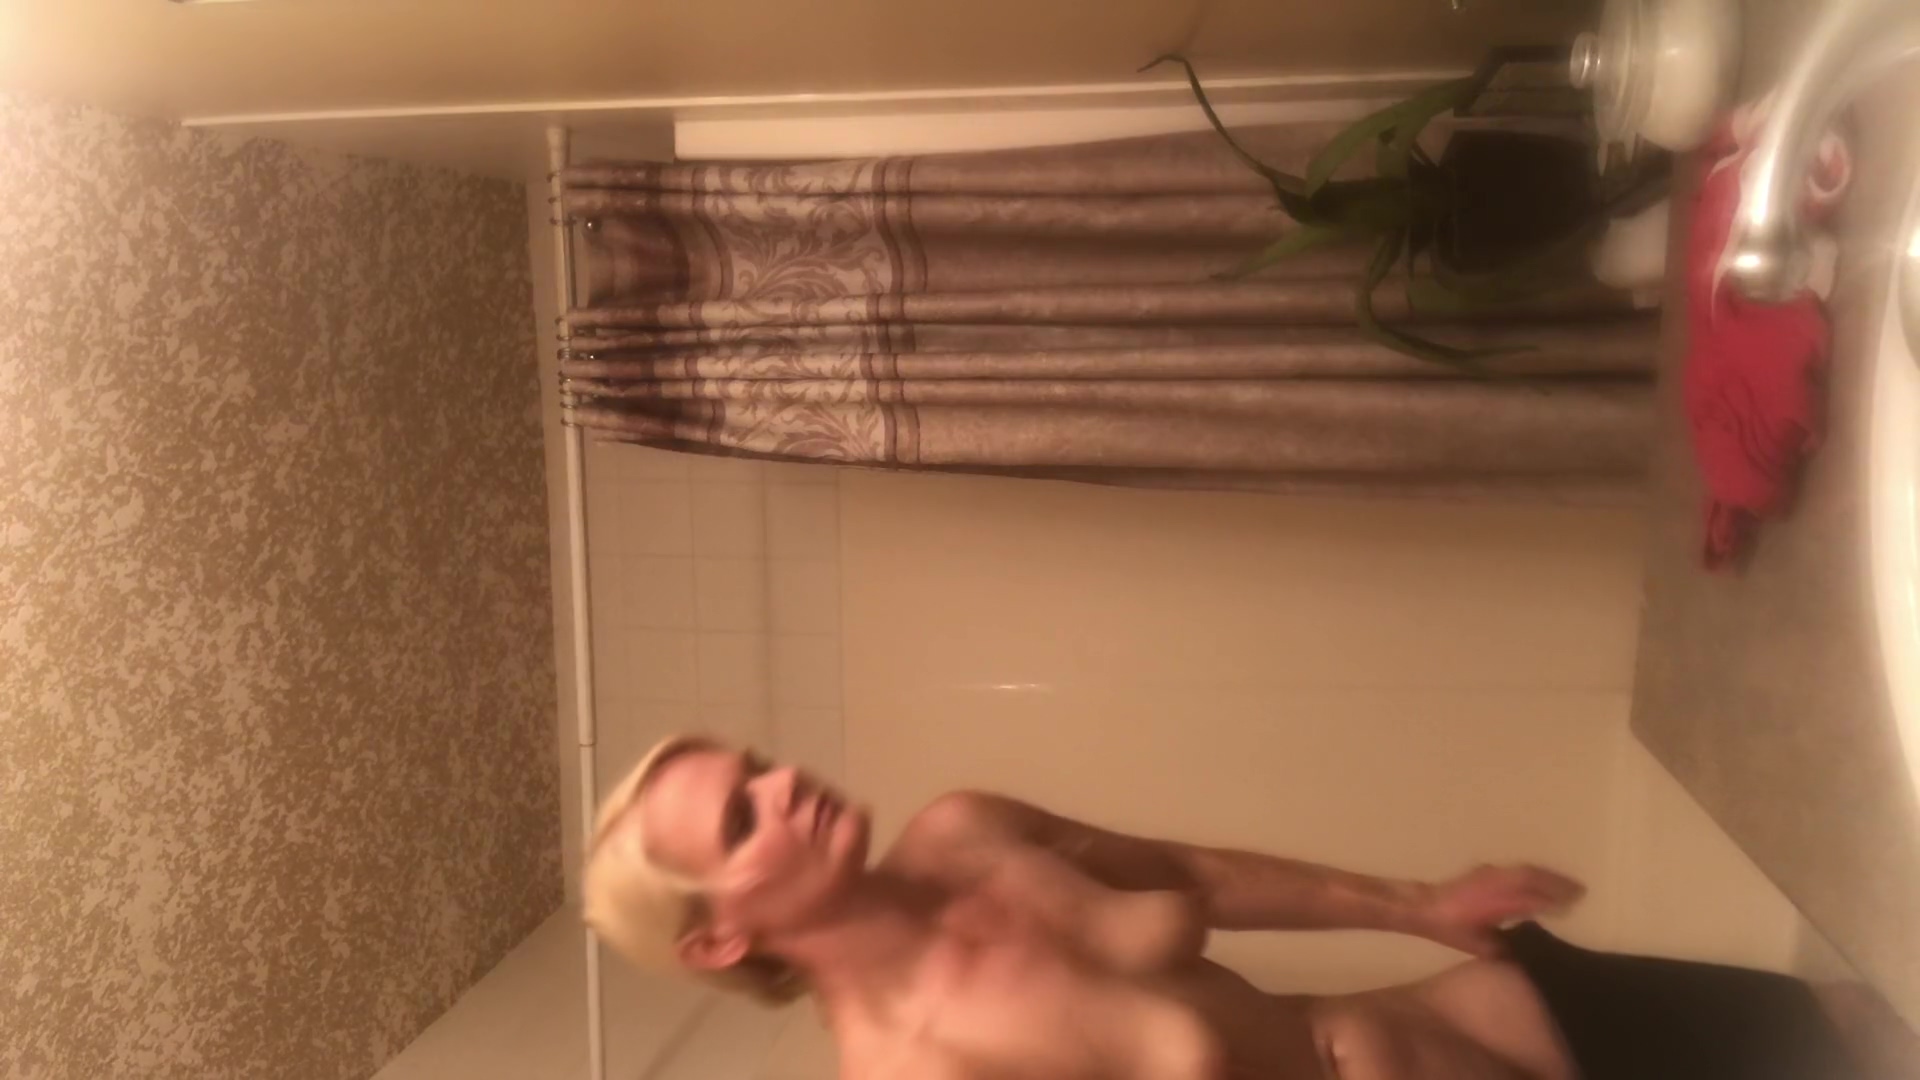 Tight Body Milf Spy Cam On Step Mom Naked After Shower! More Coming I Hope!  picture